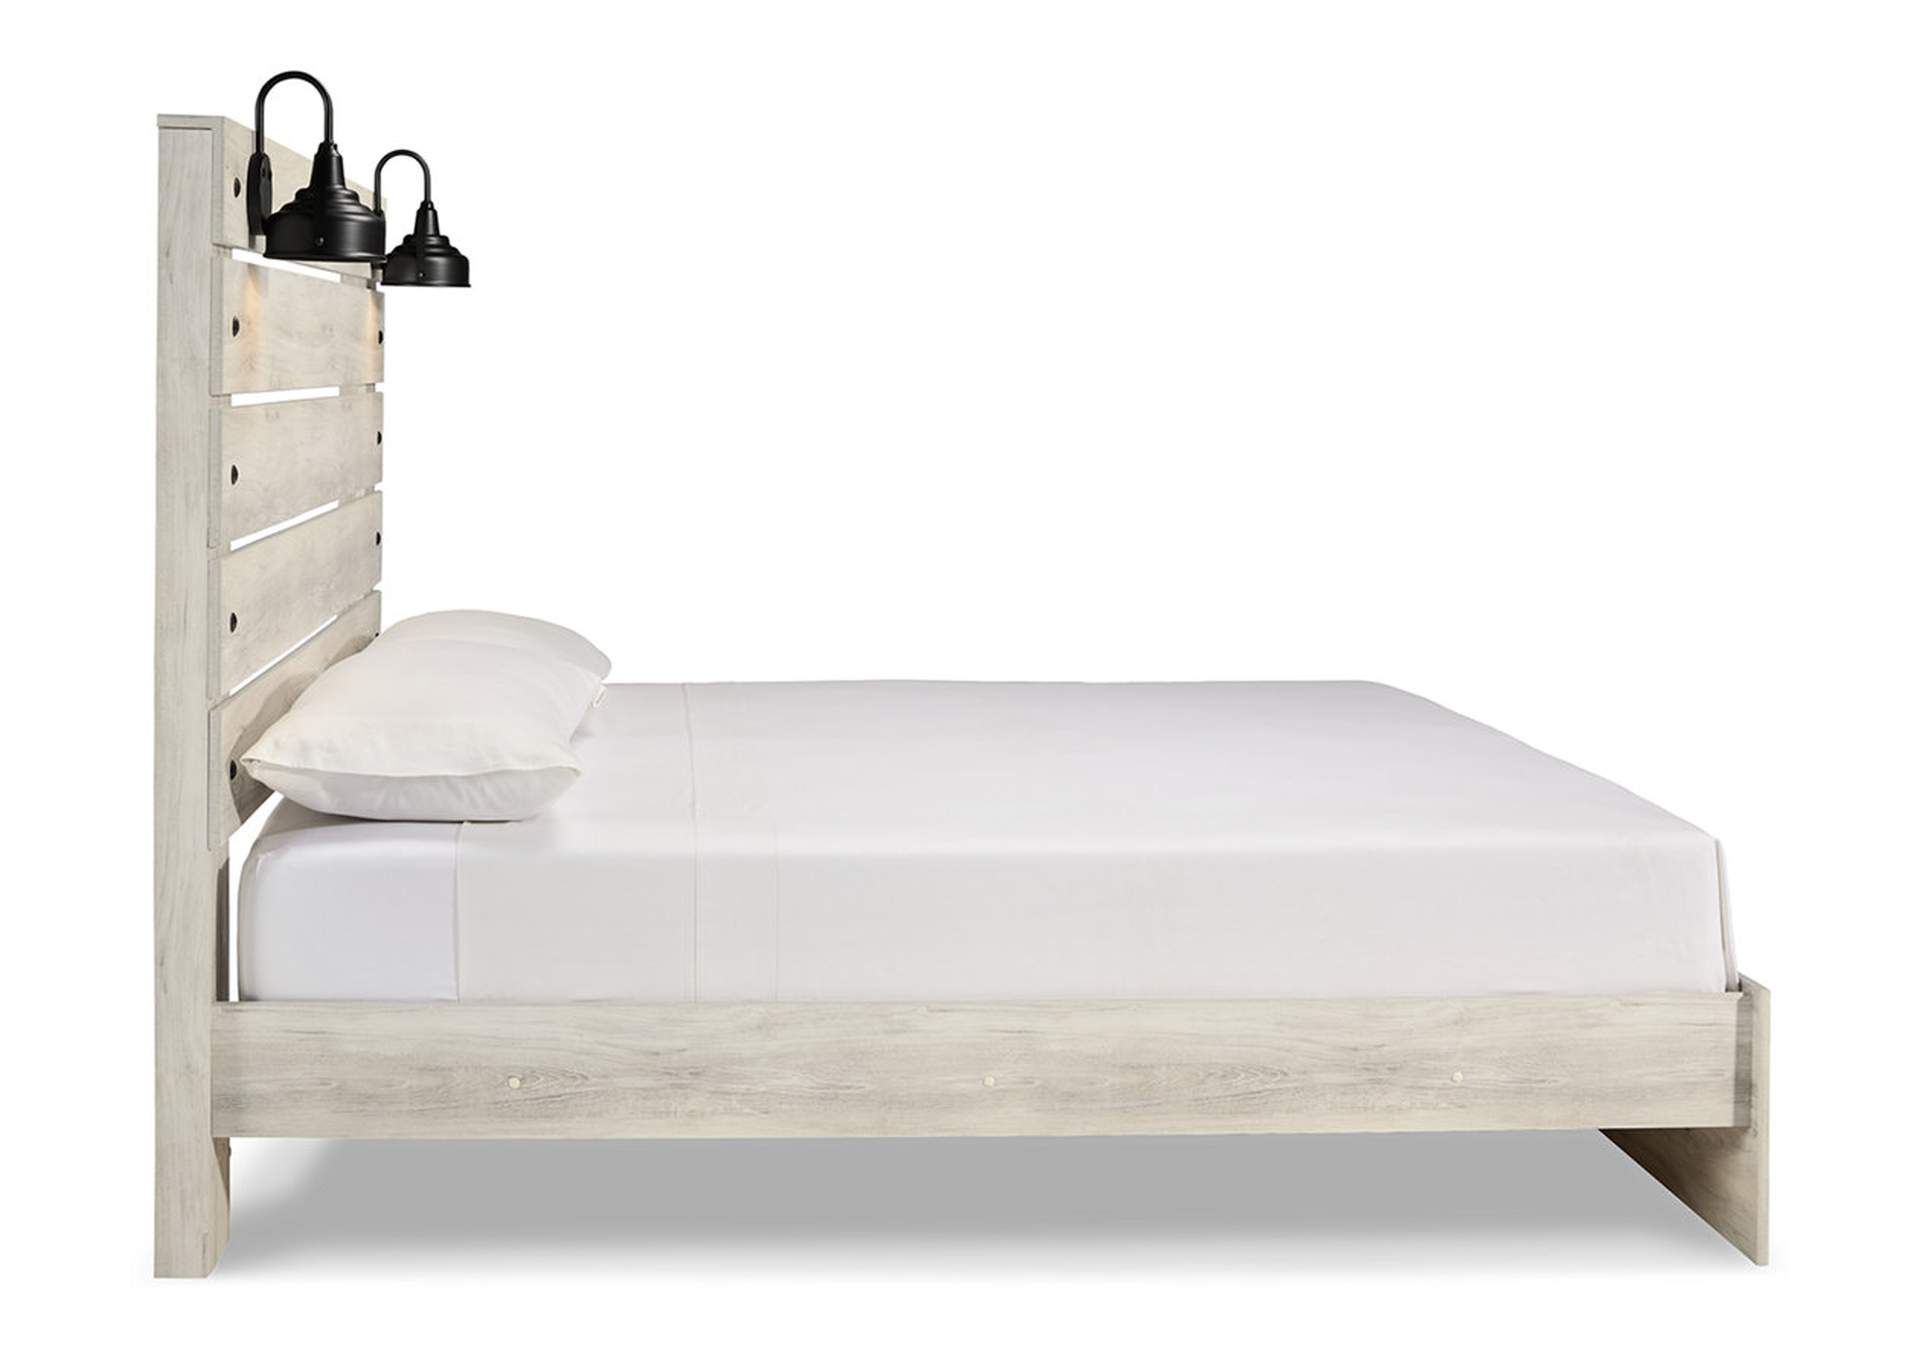 Cambeck King Panel Bed,Signature Design By Ashley